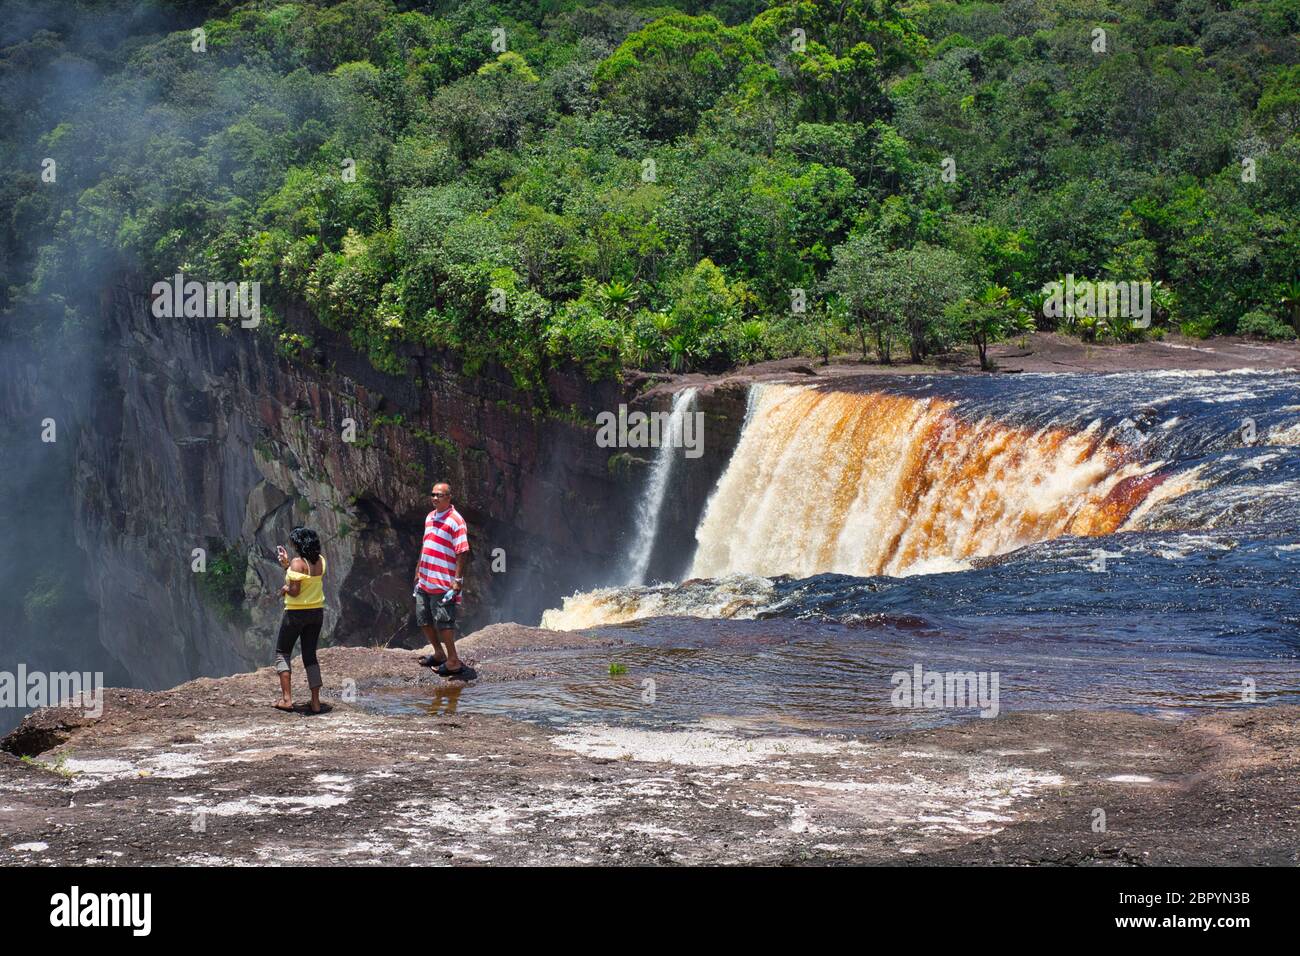 Kaieteur Falls, in Kaieteur National Park, in the Potaro-Siparuni region of Guyana and part of the Amazon rainforest. A couple paddle by the falls Stock Photo